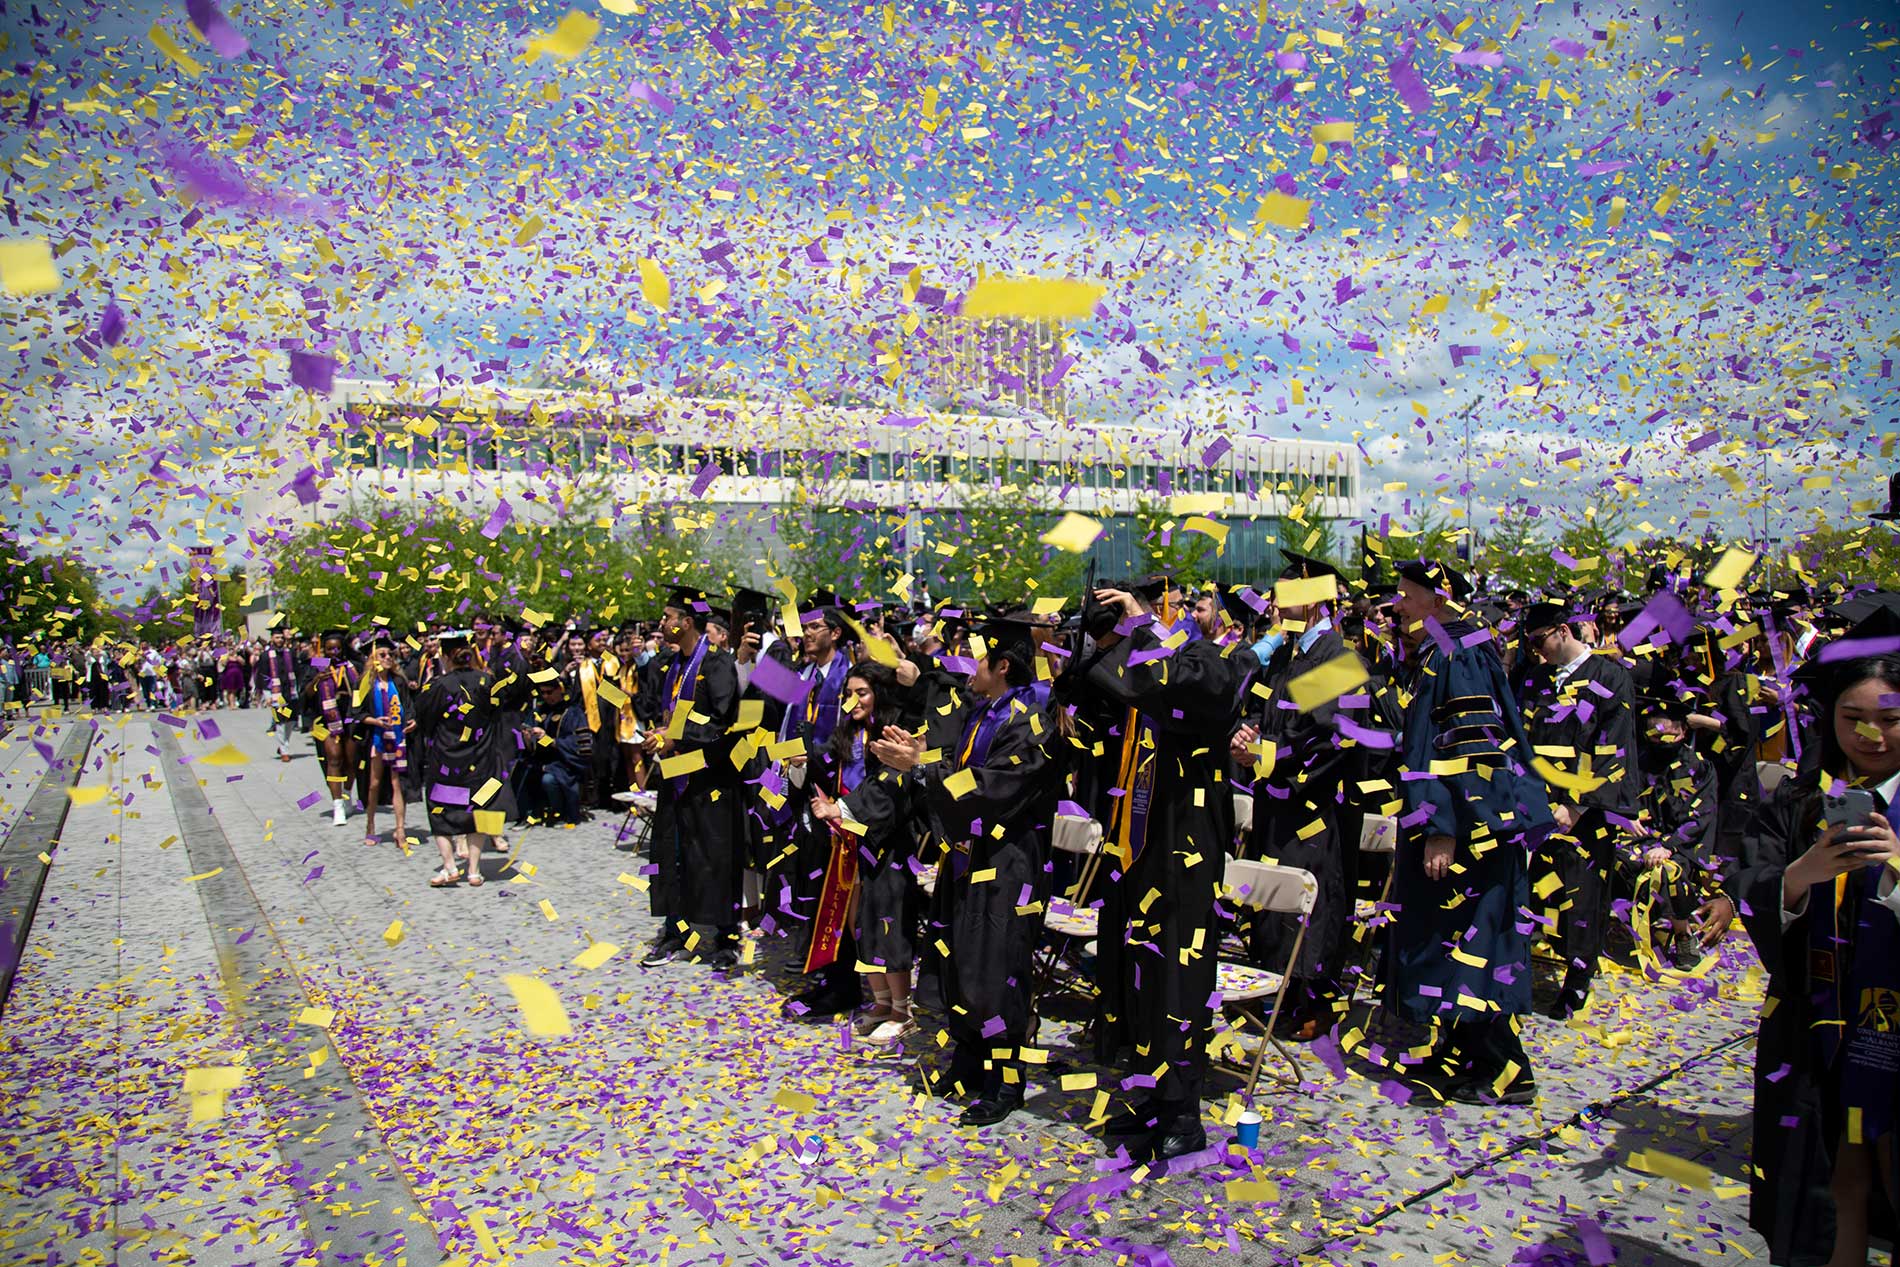 Students celebrating at commencement as confetti is released